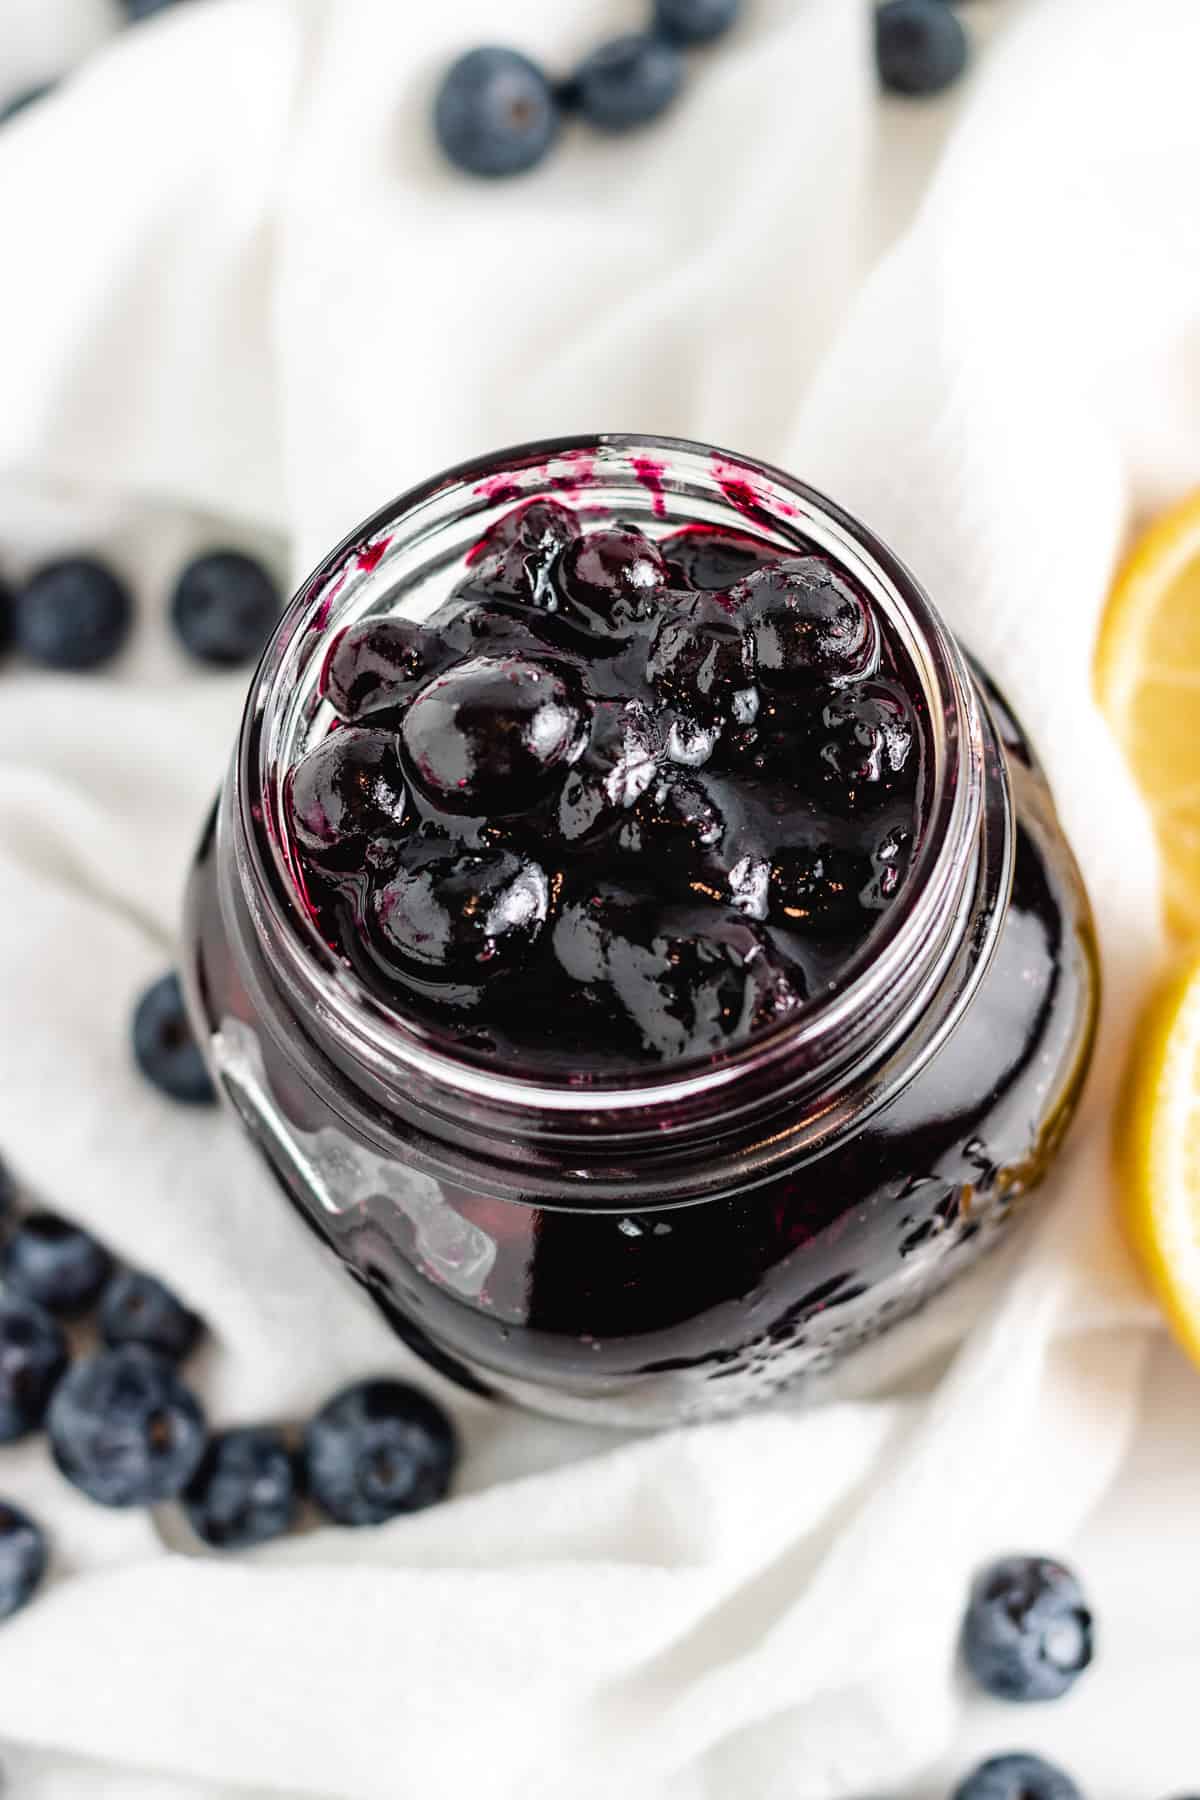 Jar of blueberry compote.